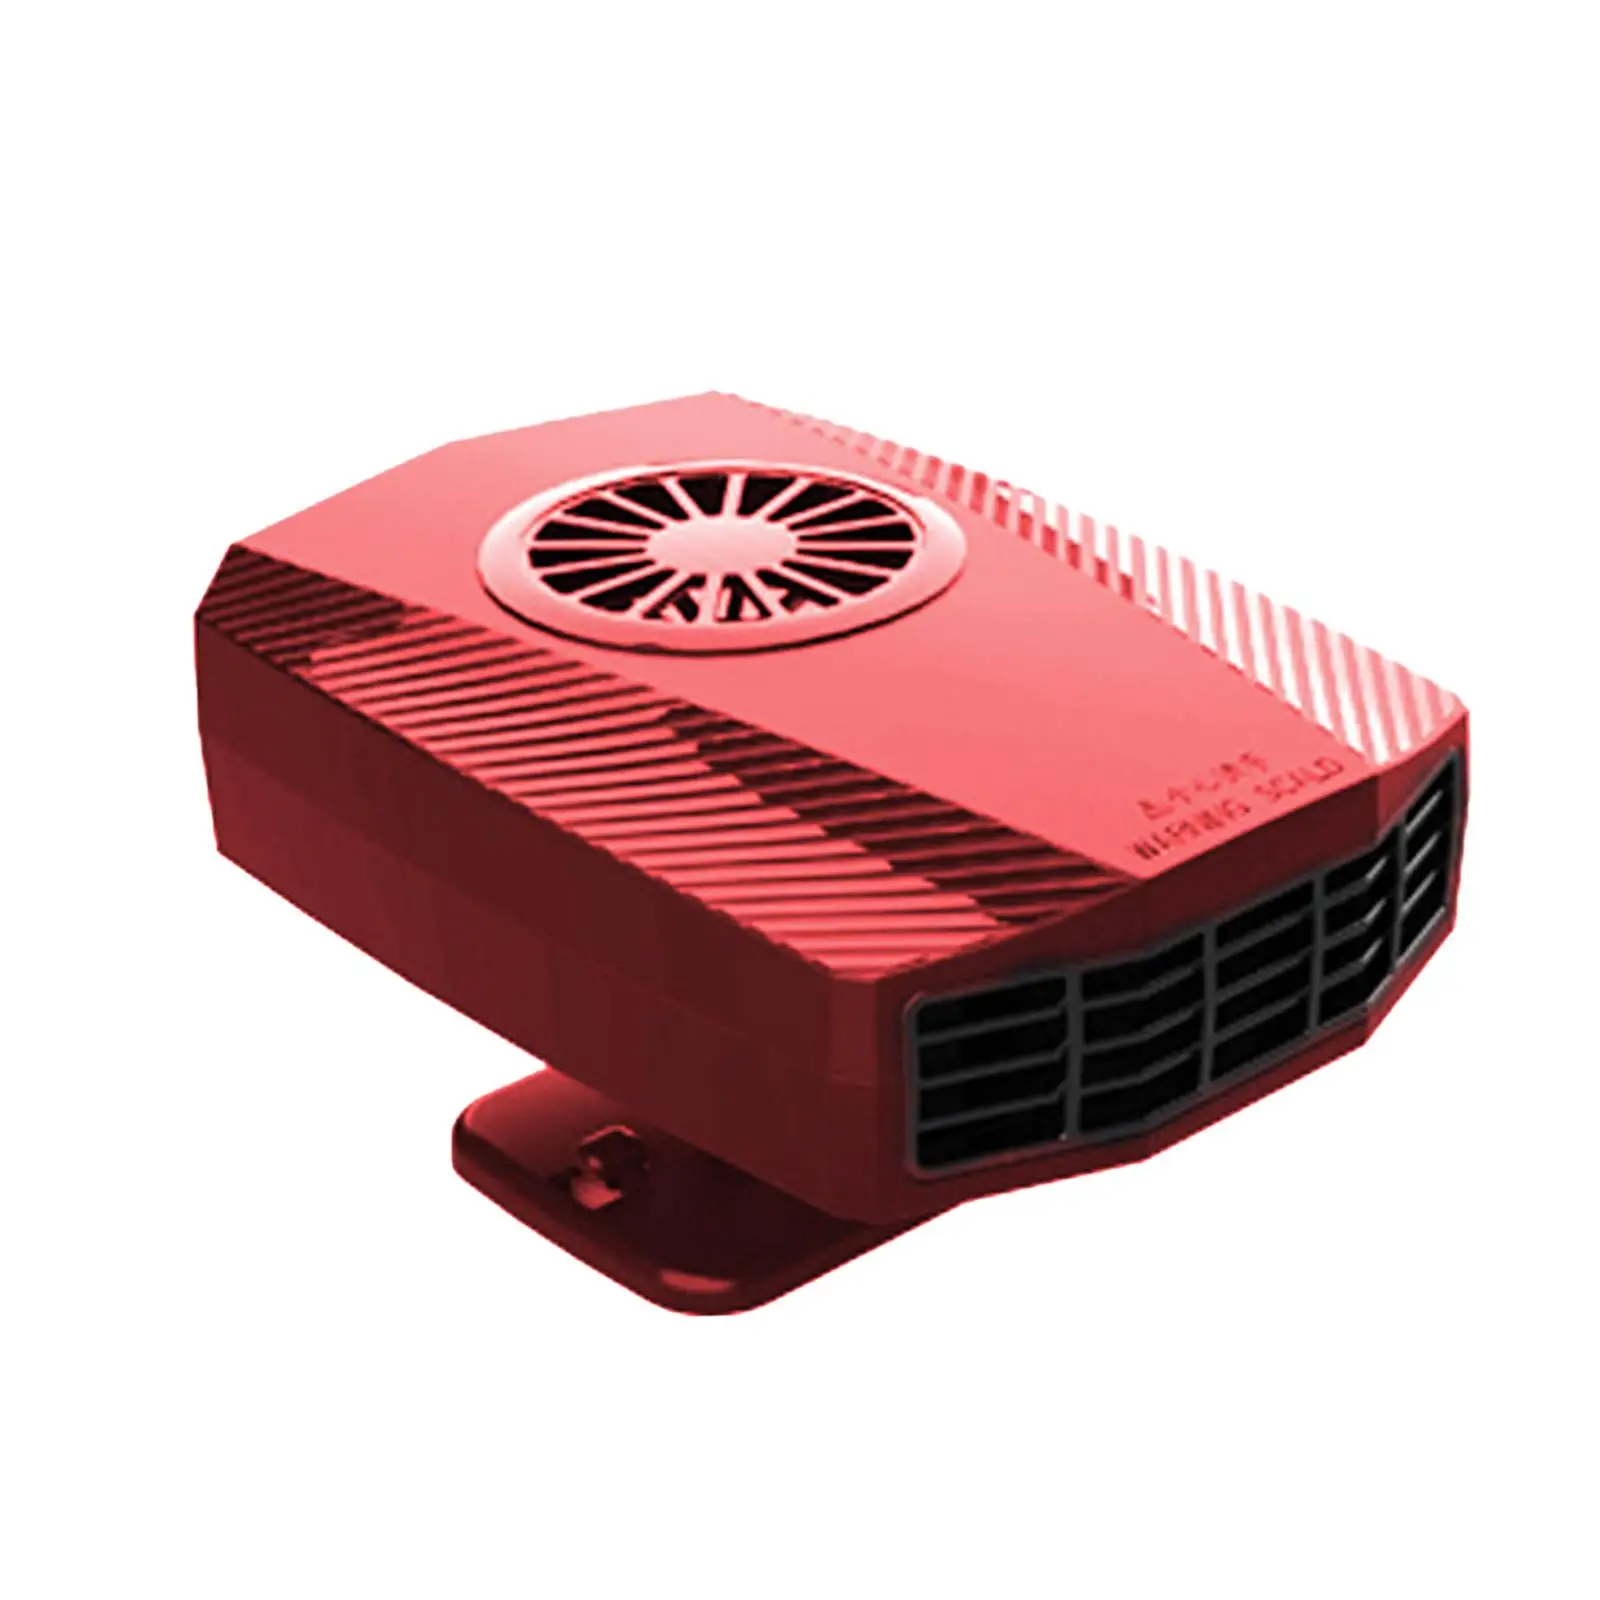 Car Heater Fan Multifunctional Small Stable Easy Installation Windscreen Defogger Portable for Truck Car Taxis Travel